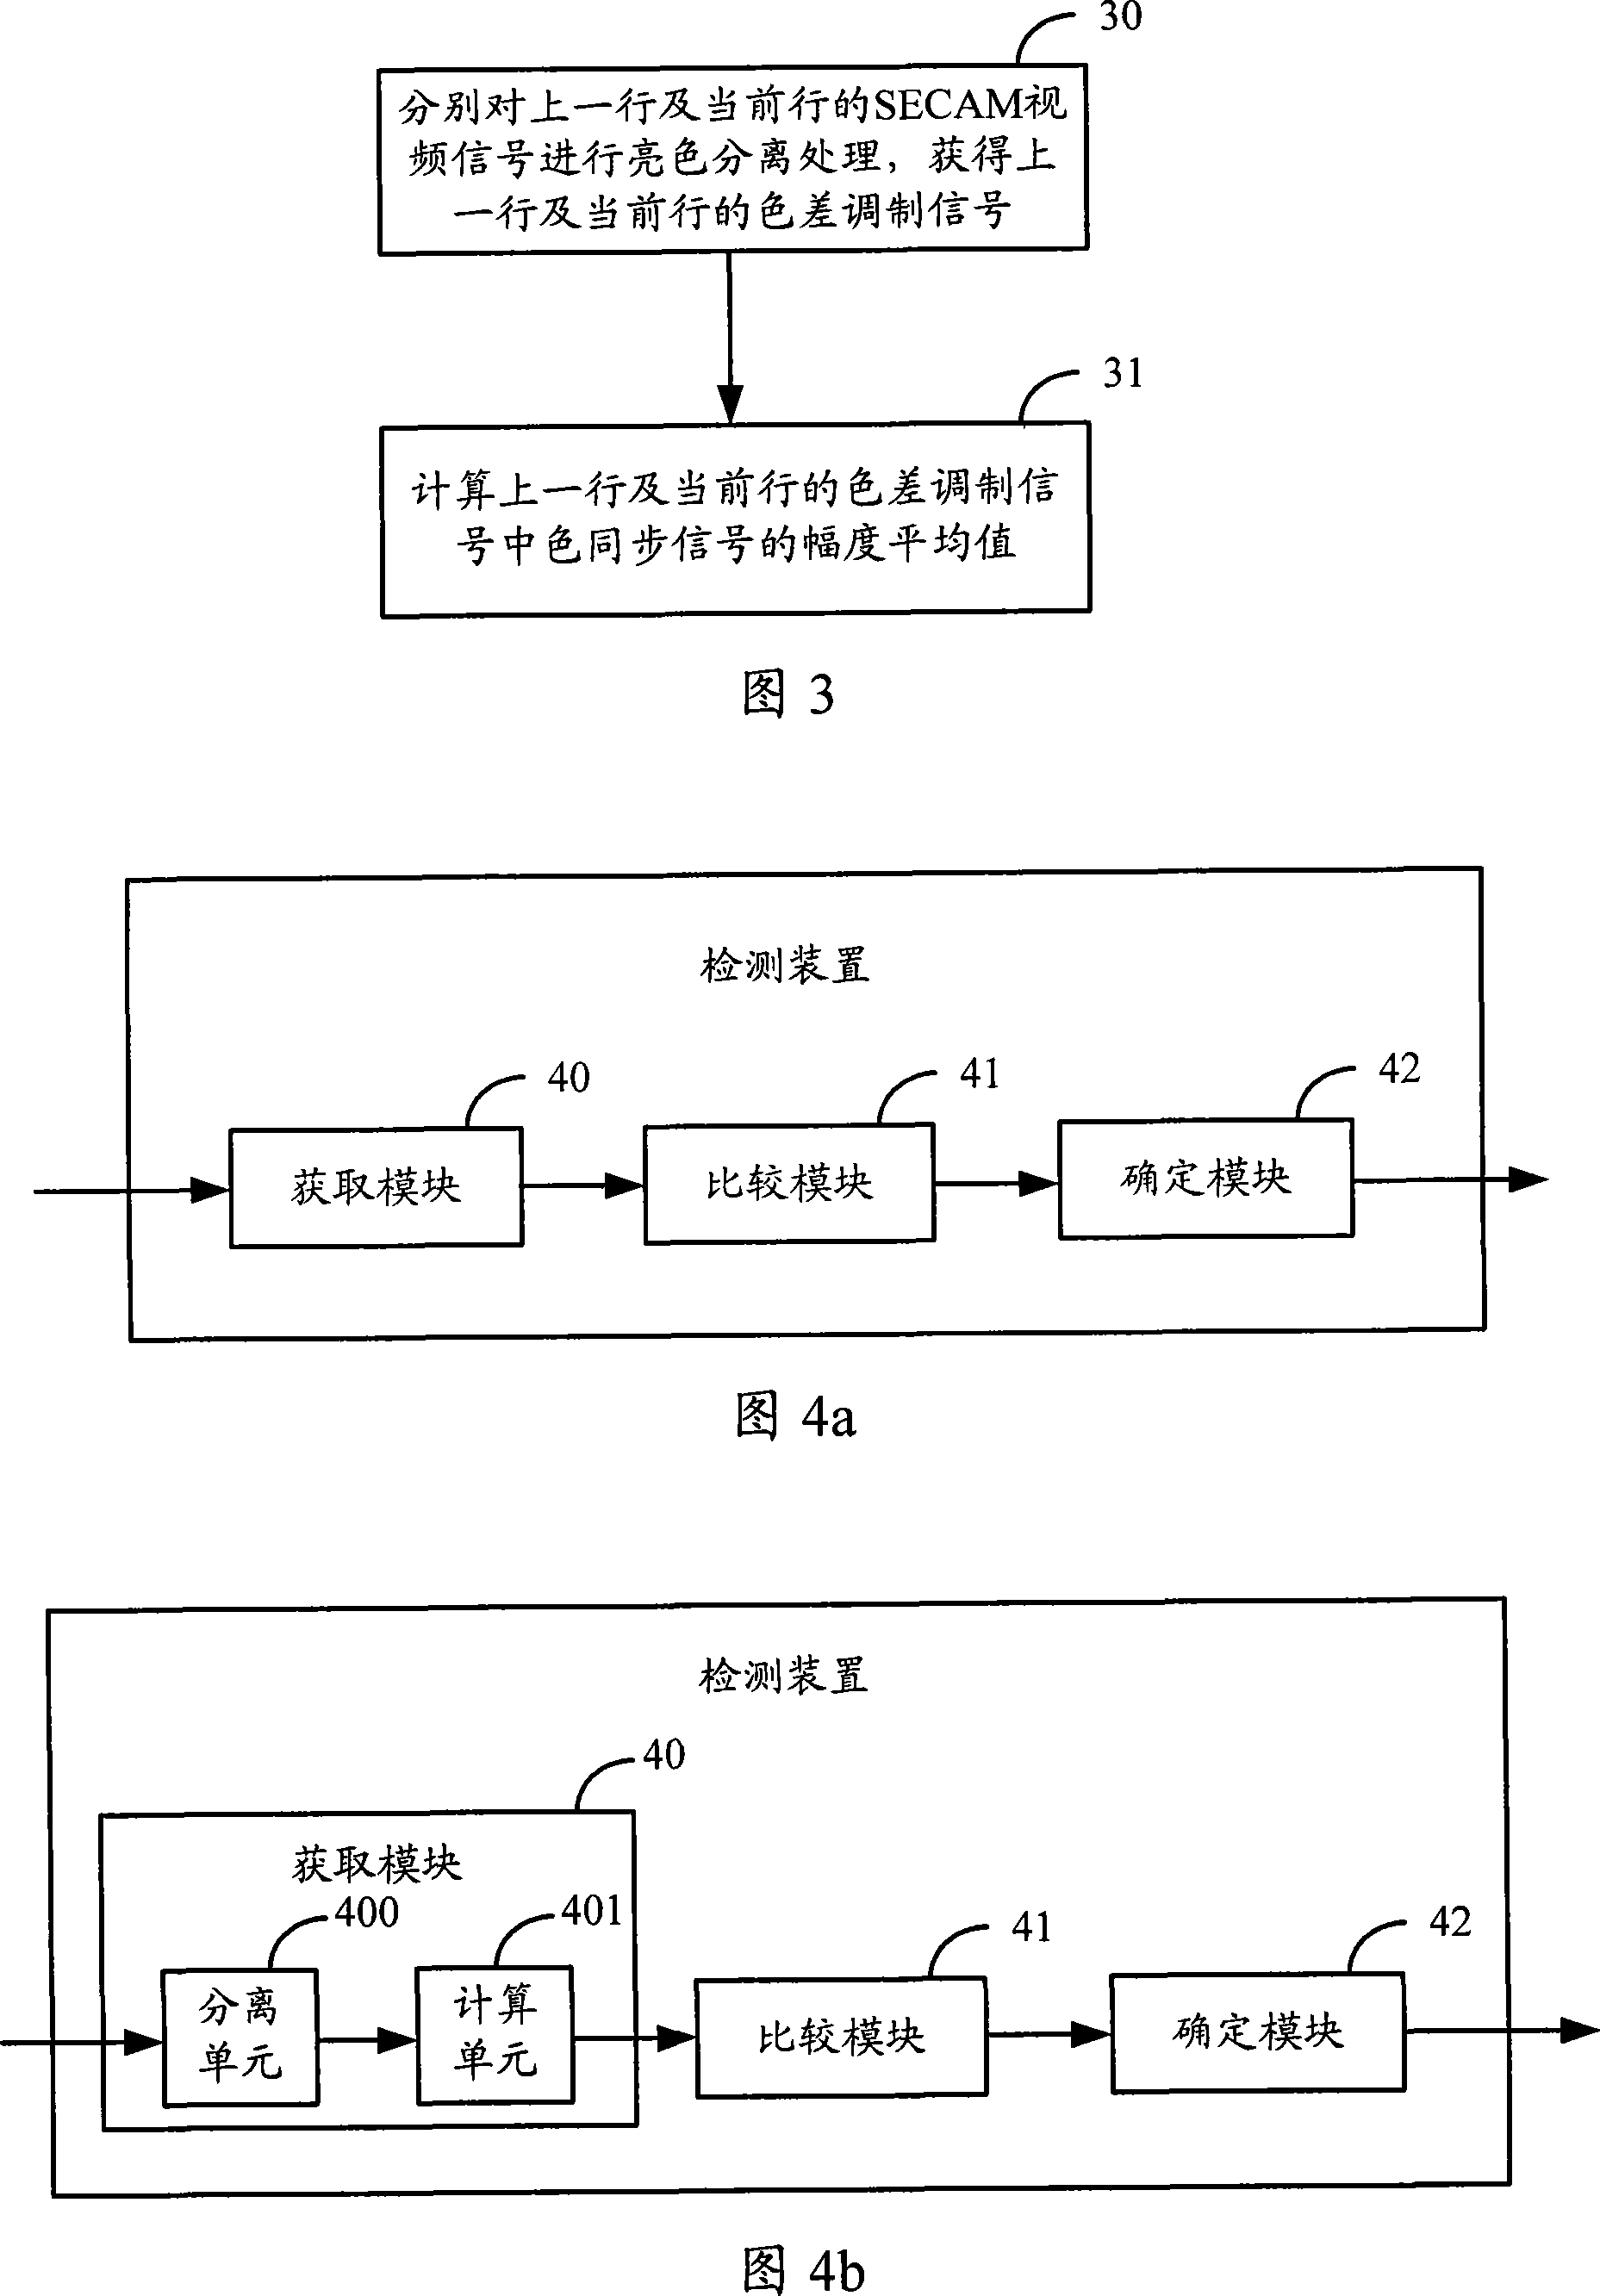 Detection method and device of SECAM video signal subcarrier type